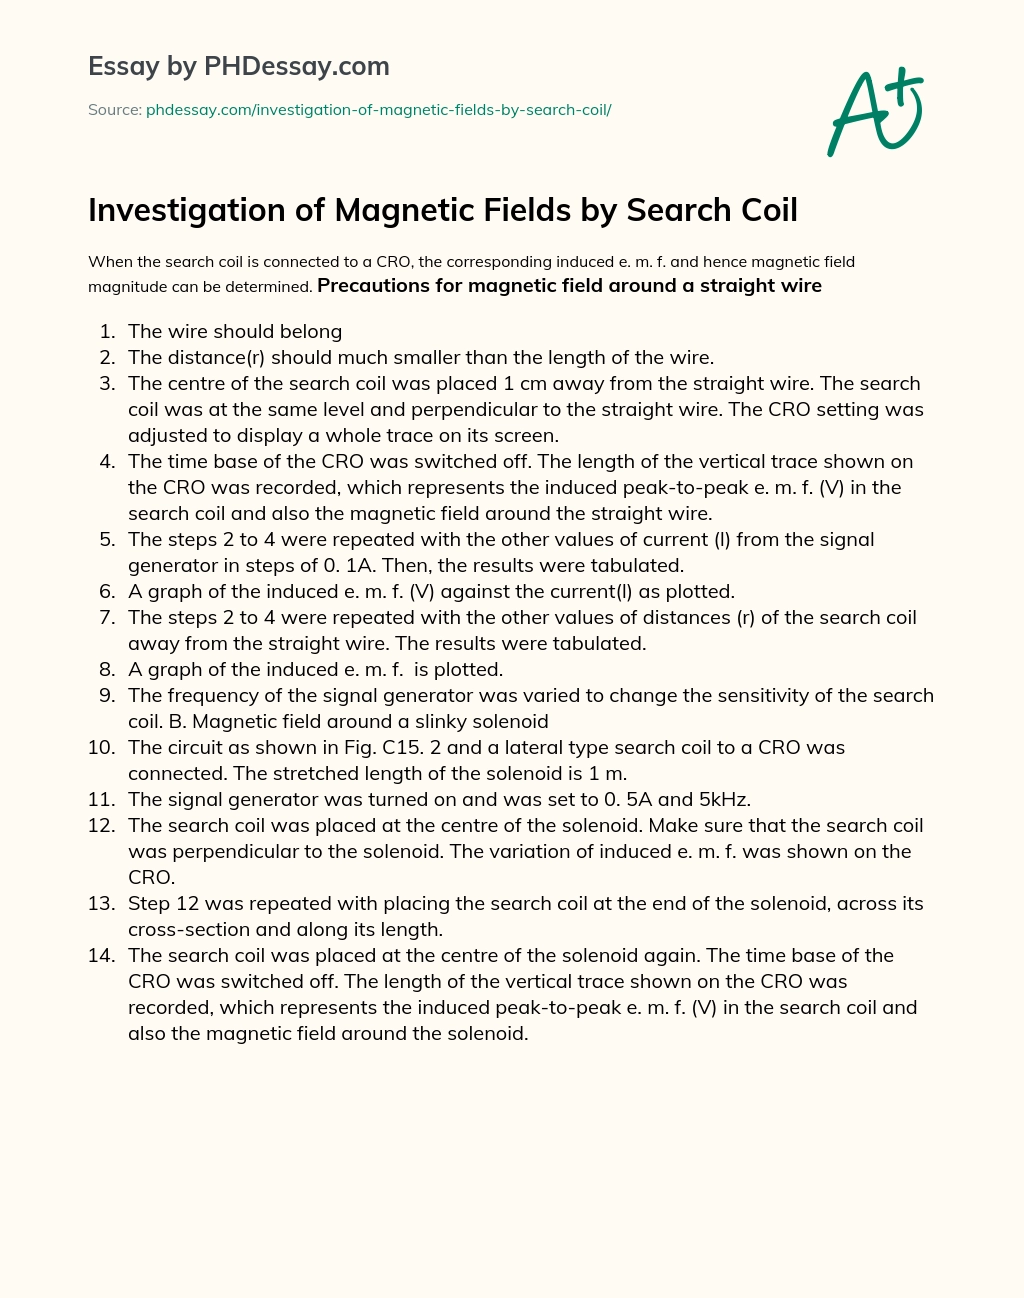 Investigation of Magnetic Fields by Search Coil essay